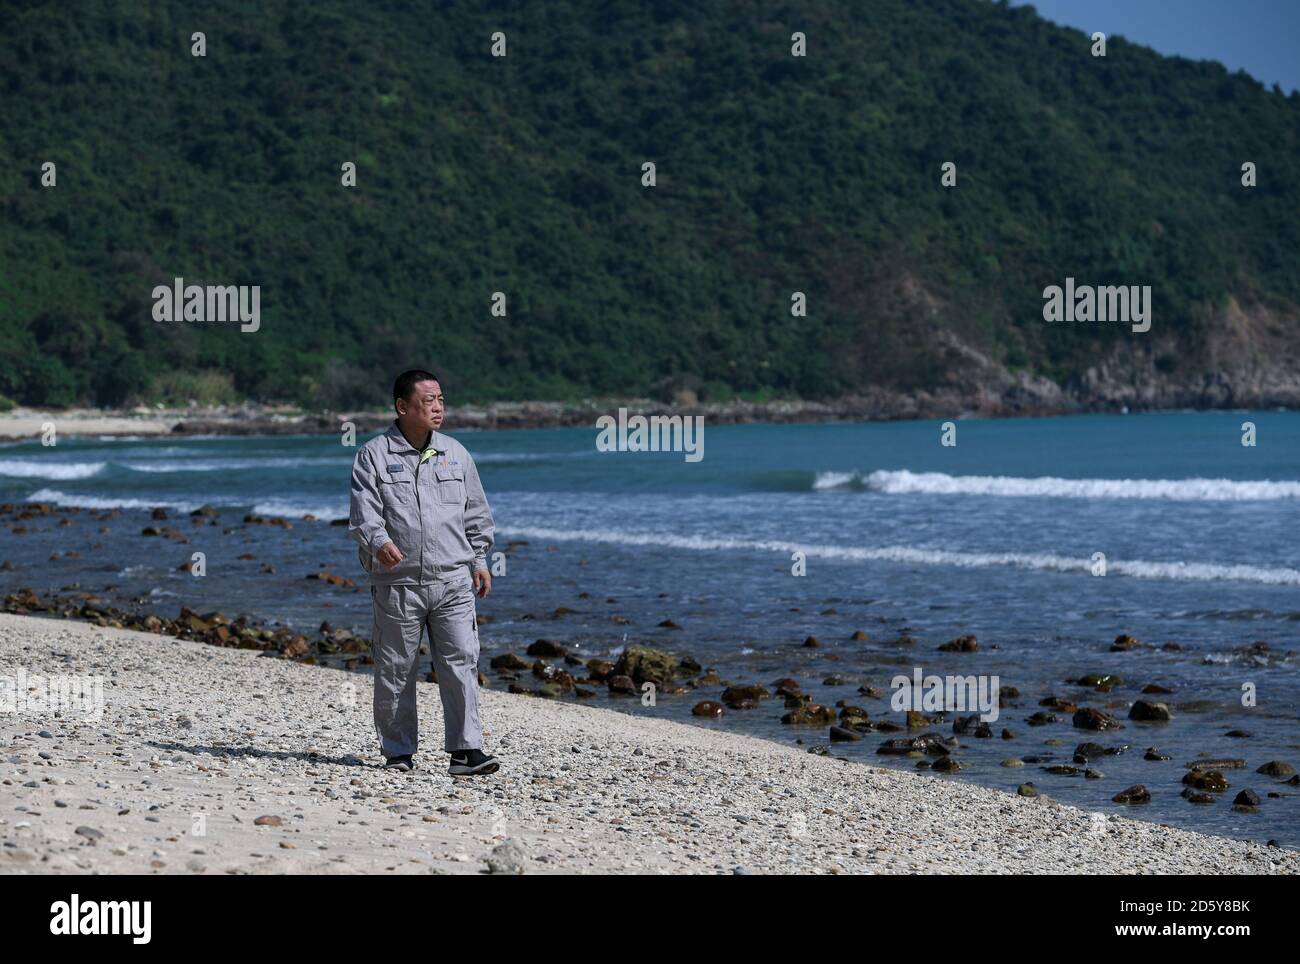 (201014) -- SHENZHEN, Oct. 14, 2020 (Xinhua) -- Qiao Sukai walks on the beach in Shenzhen, south China's Guangdong Province, Nov. 20, 2019. Every 18 months, the Dayawan Nuclear Power Plant has to undergo a fuel assemblies replacement, which is one of the most important moments for the nuclear power plant. Dozens of engineers are divided into four shifts and operate the equipment day and night when the reactor is shut down. Their leader, Qiao Sukai, has been dealing with nuclear fuel since July 1993 when the nuclear fuel assembly of Dayawan Nuclear Power Plant arrived.    The professional and t Stock Photo